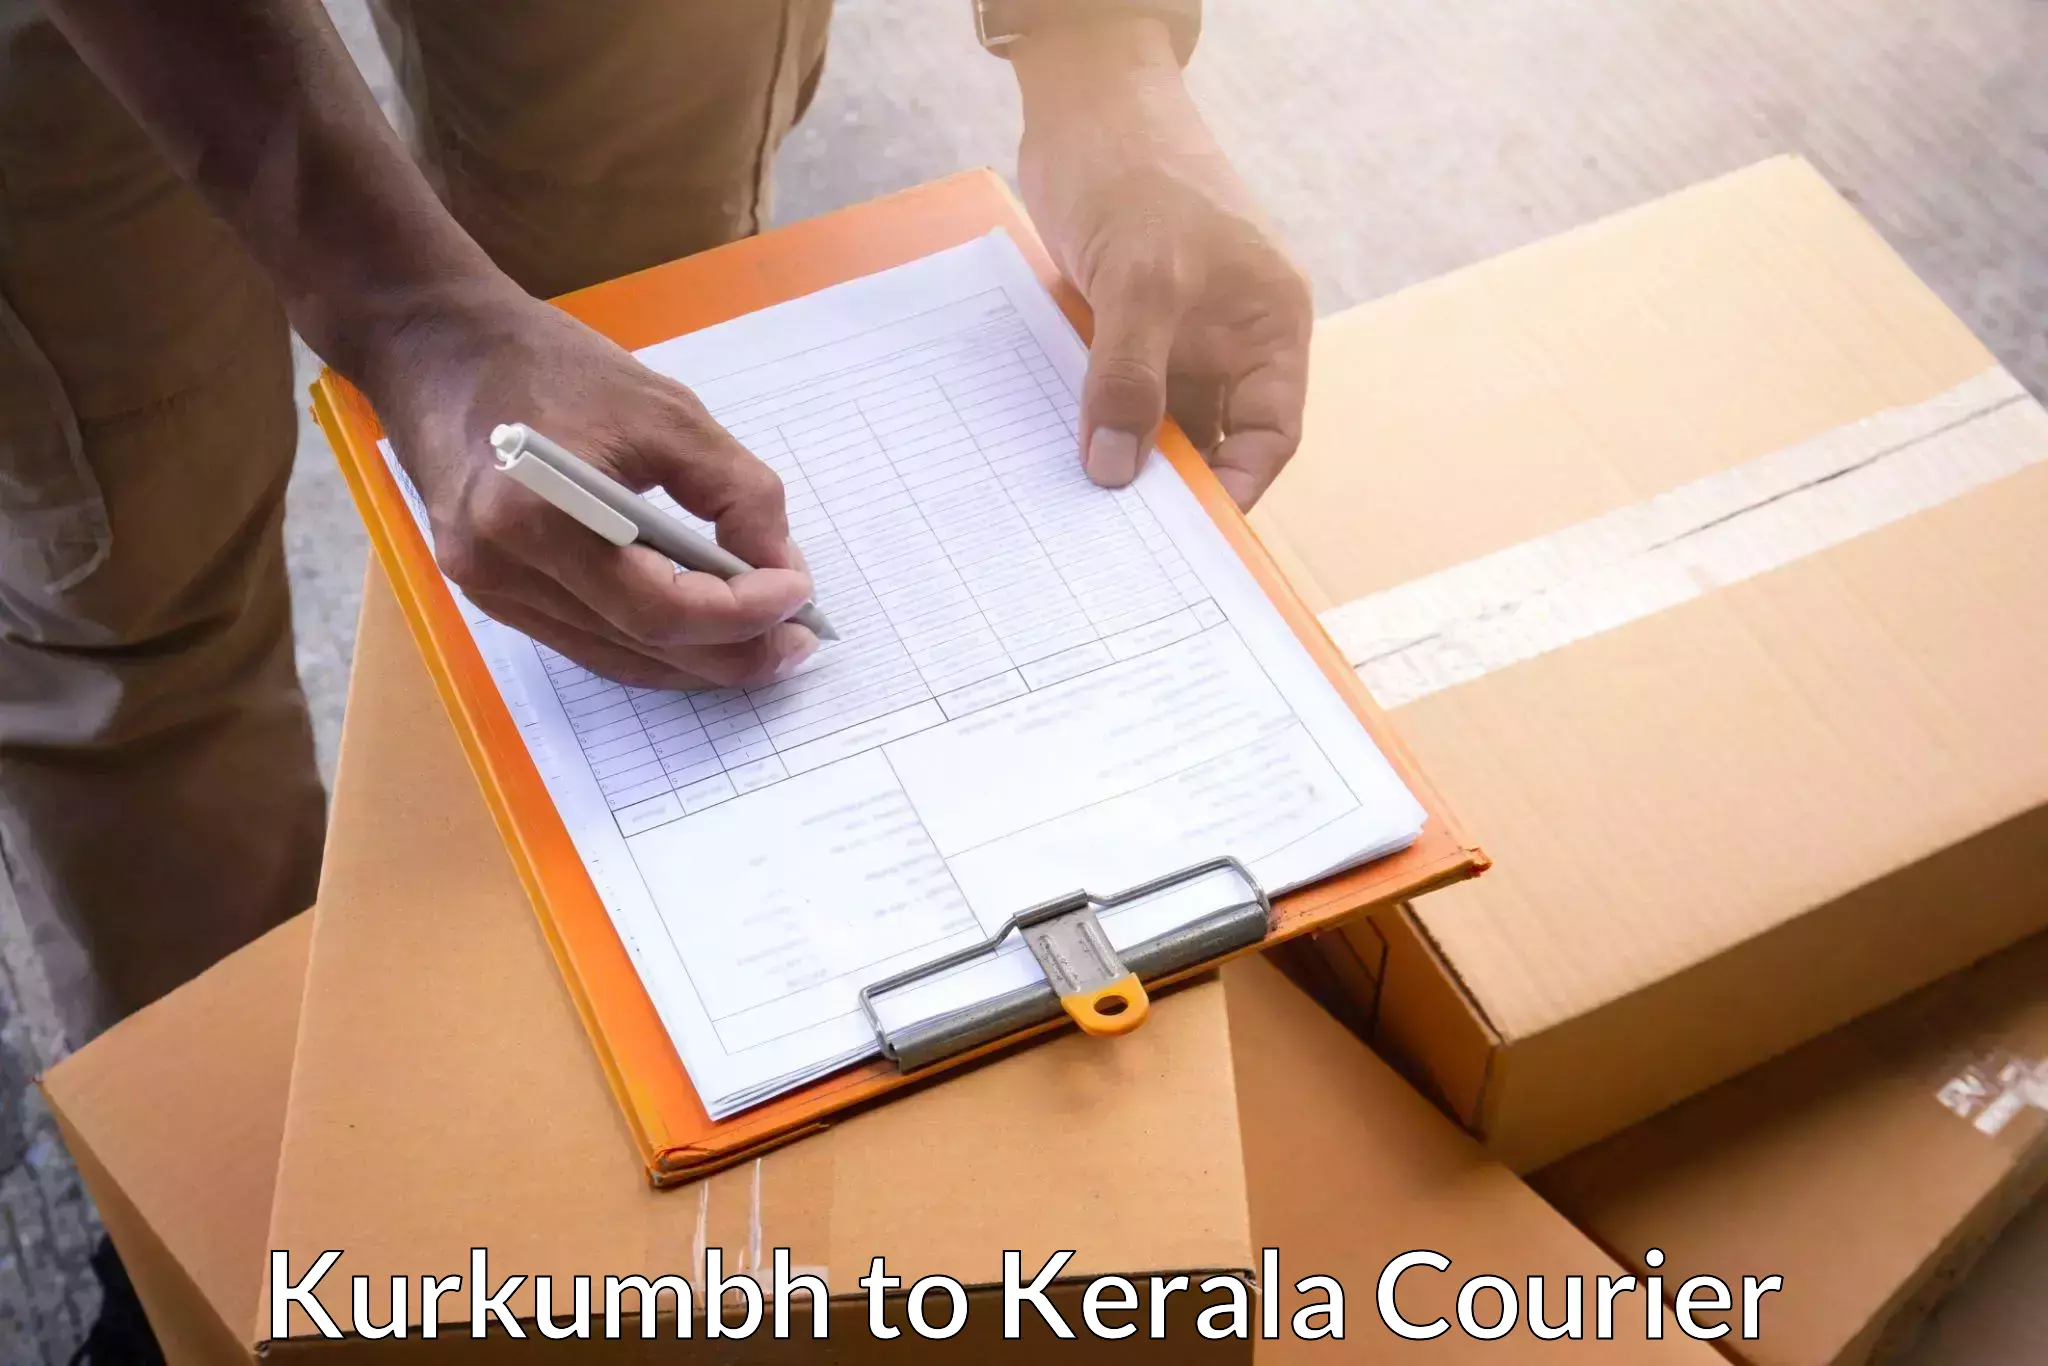 Expedited parcel delivery in Kurkumbh to Panthalam